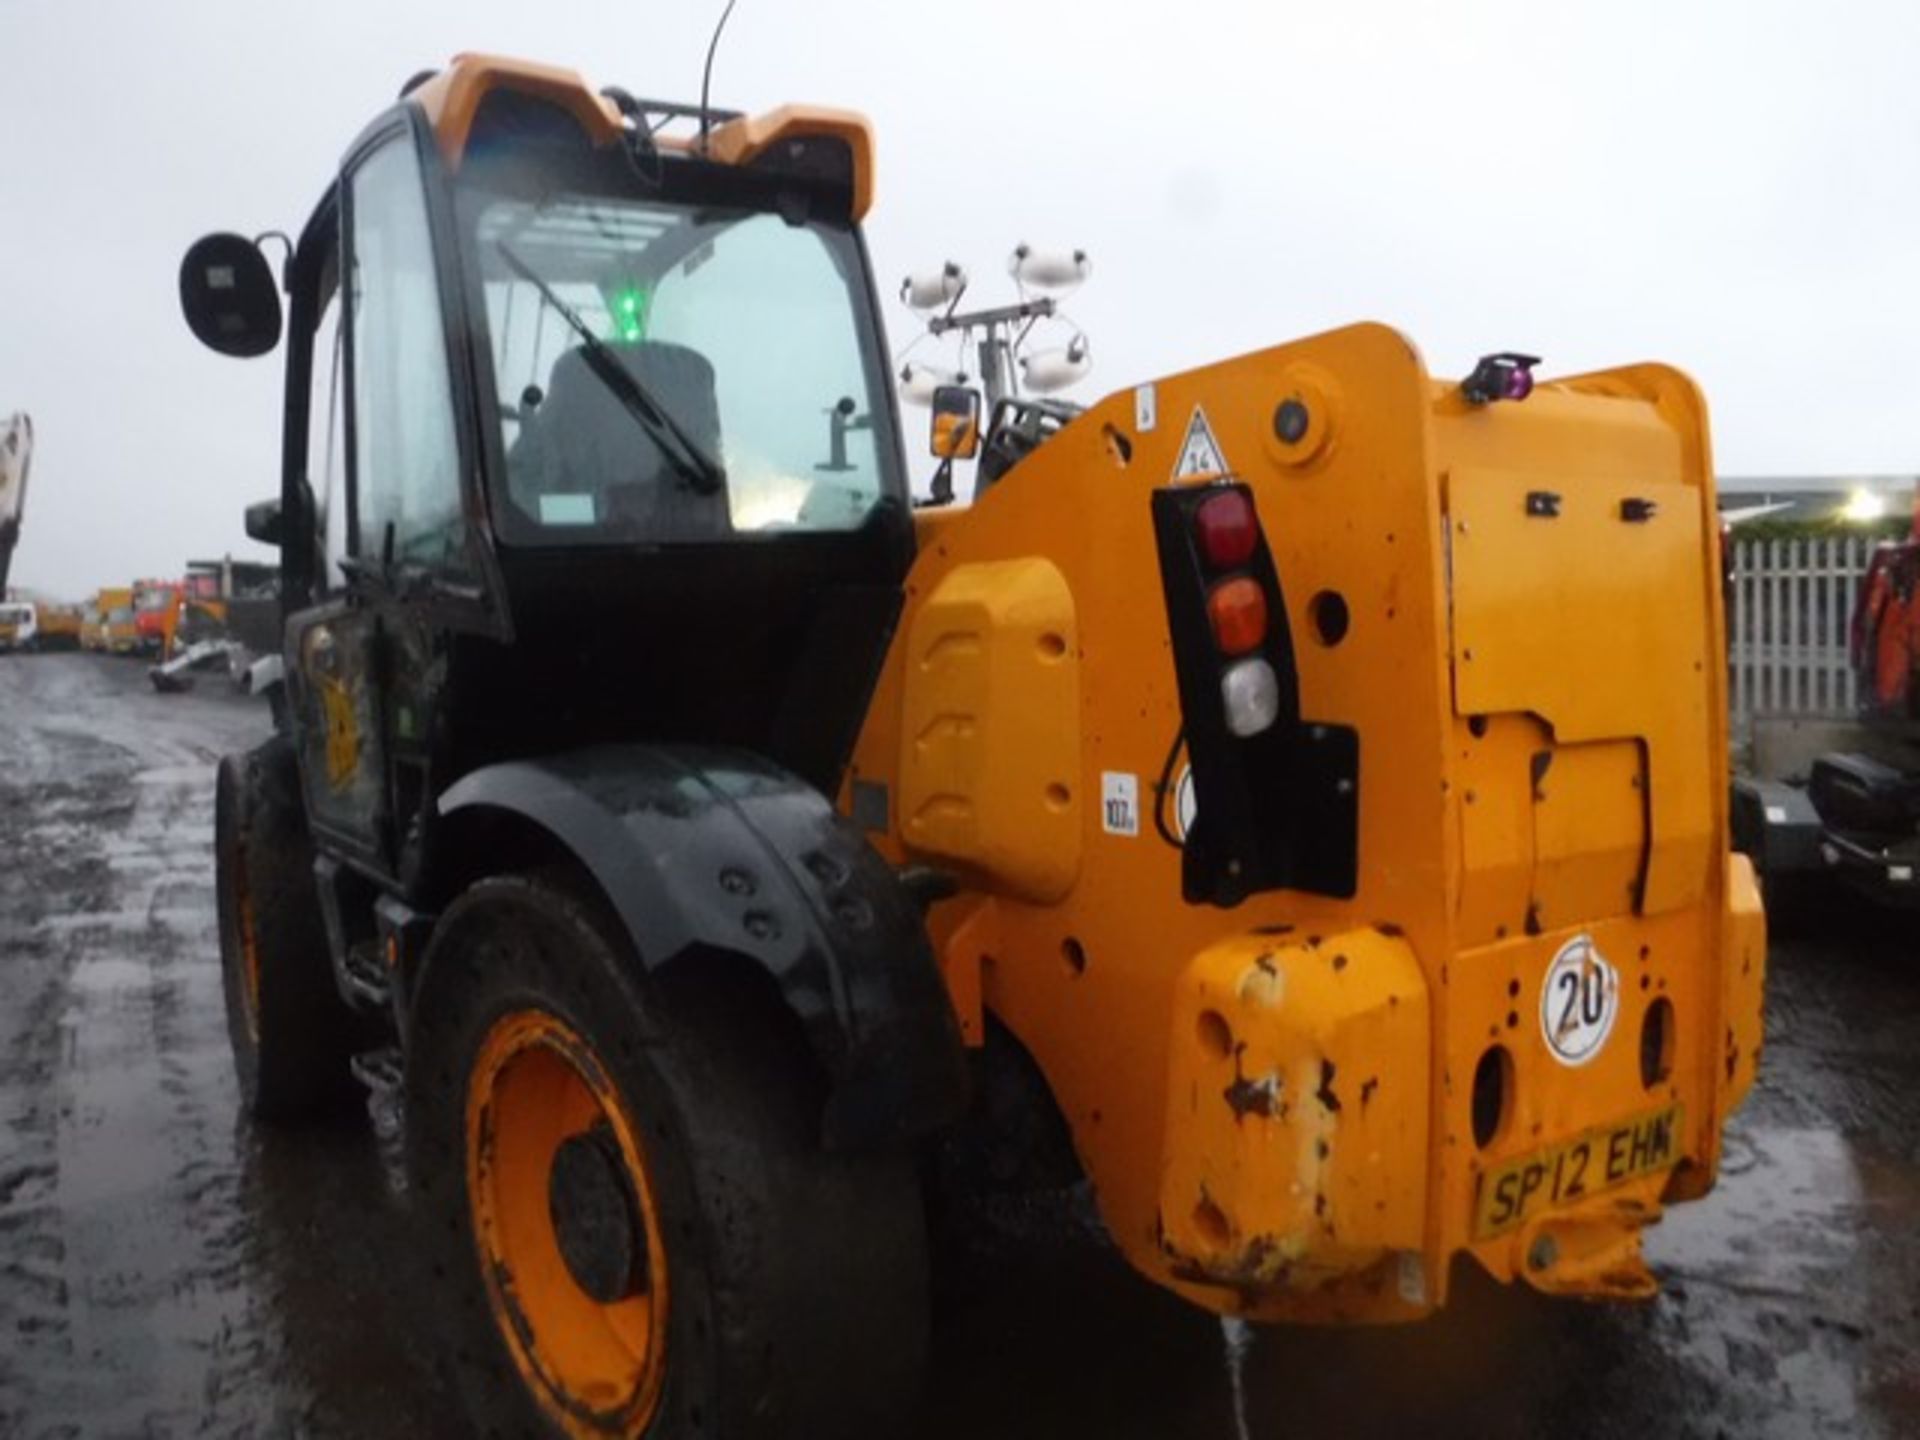 2012 JCB 550 - 80 WASTE SPECIAL TELESCOPIC HANDLER, 8870hrs (NOT VERIFIED) ON SOLID TYRES - Image 9 of 13